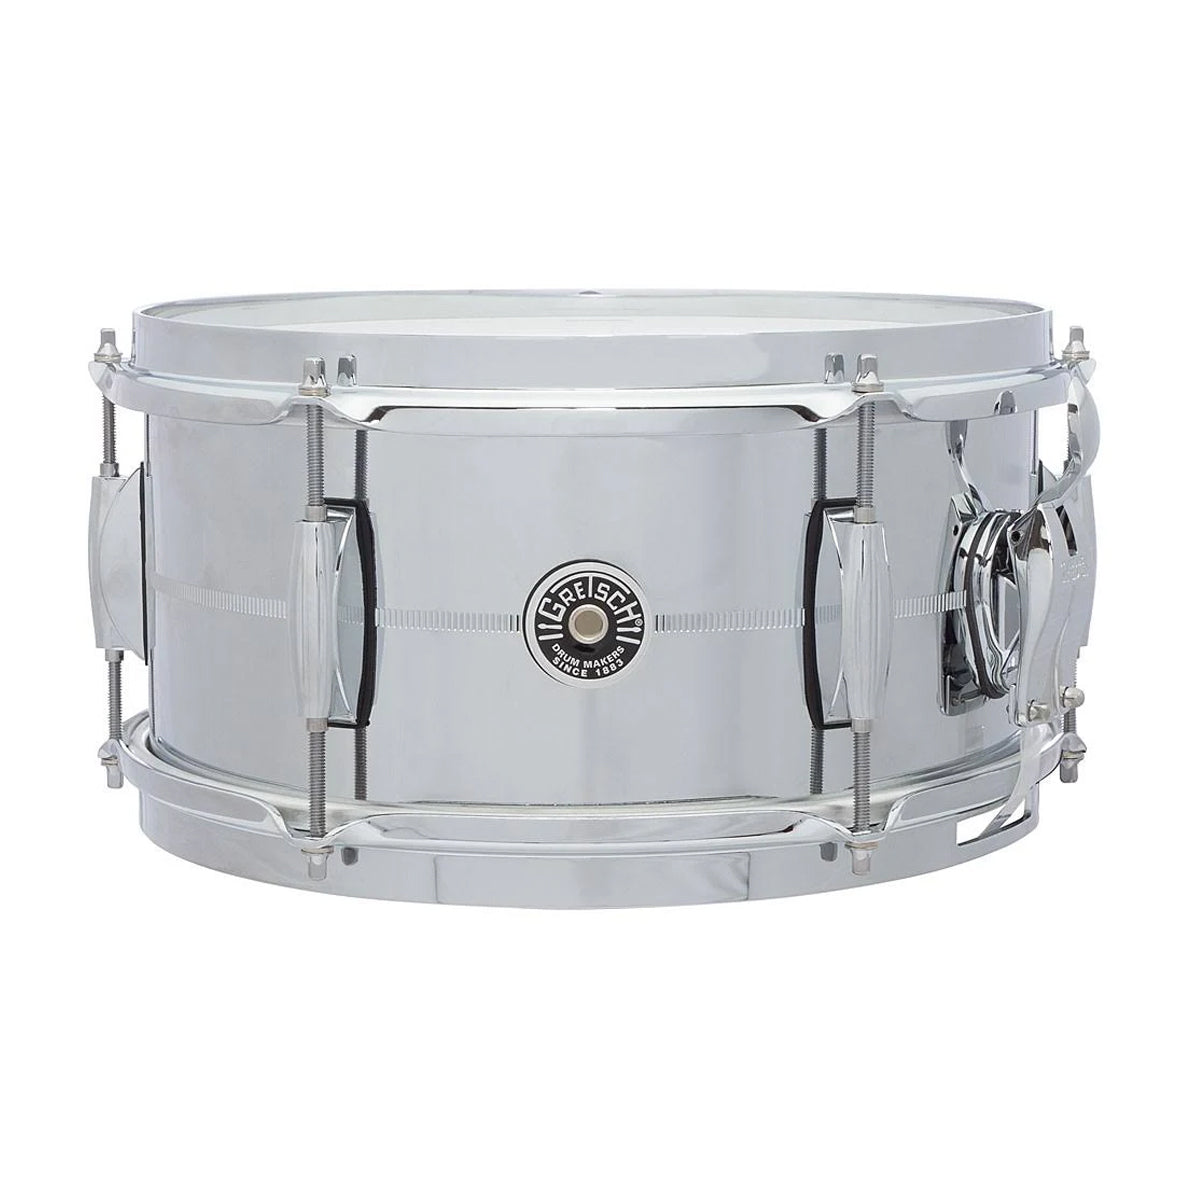 Gretsch USA Brooklyn Chrome Over Steel 12"x6" Snare Drum